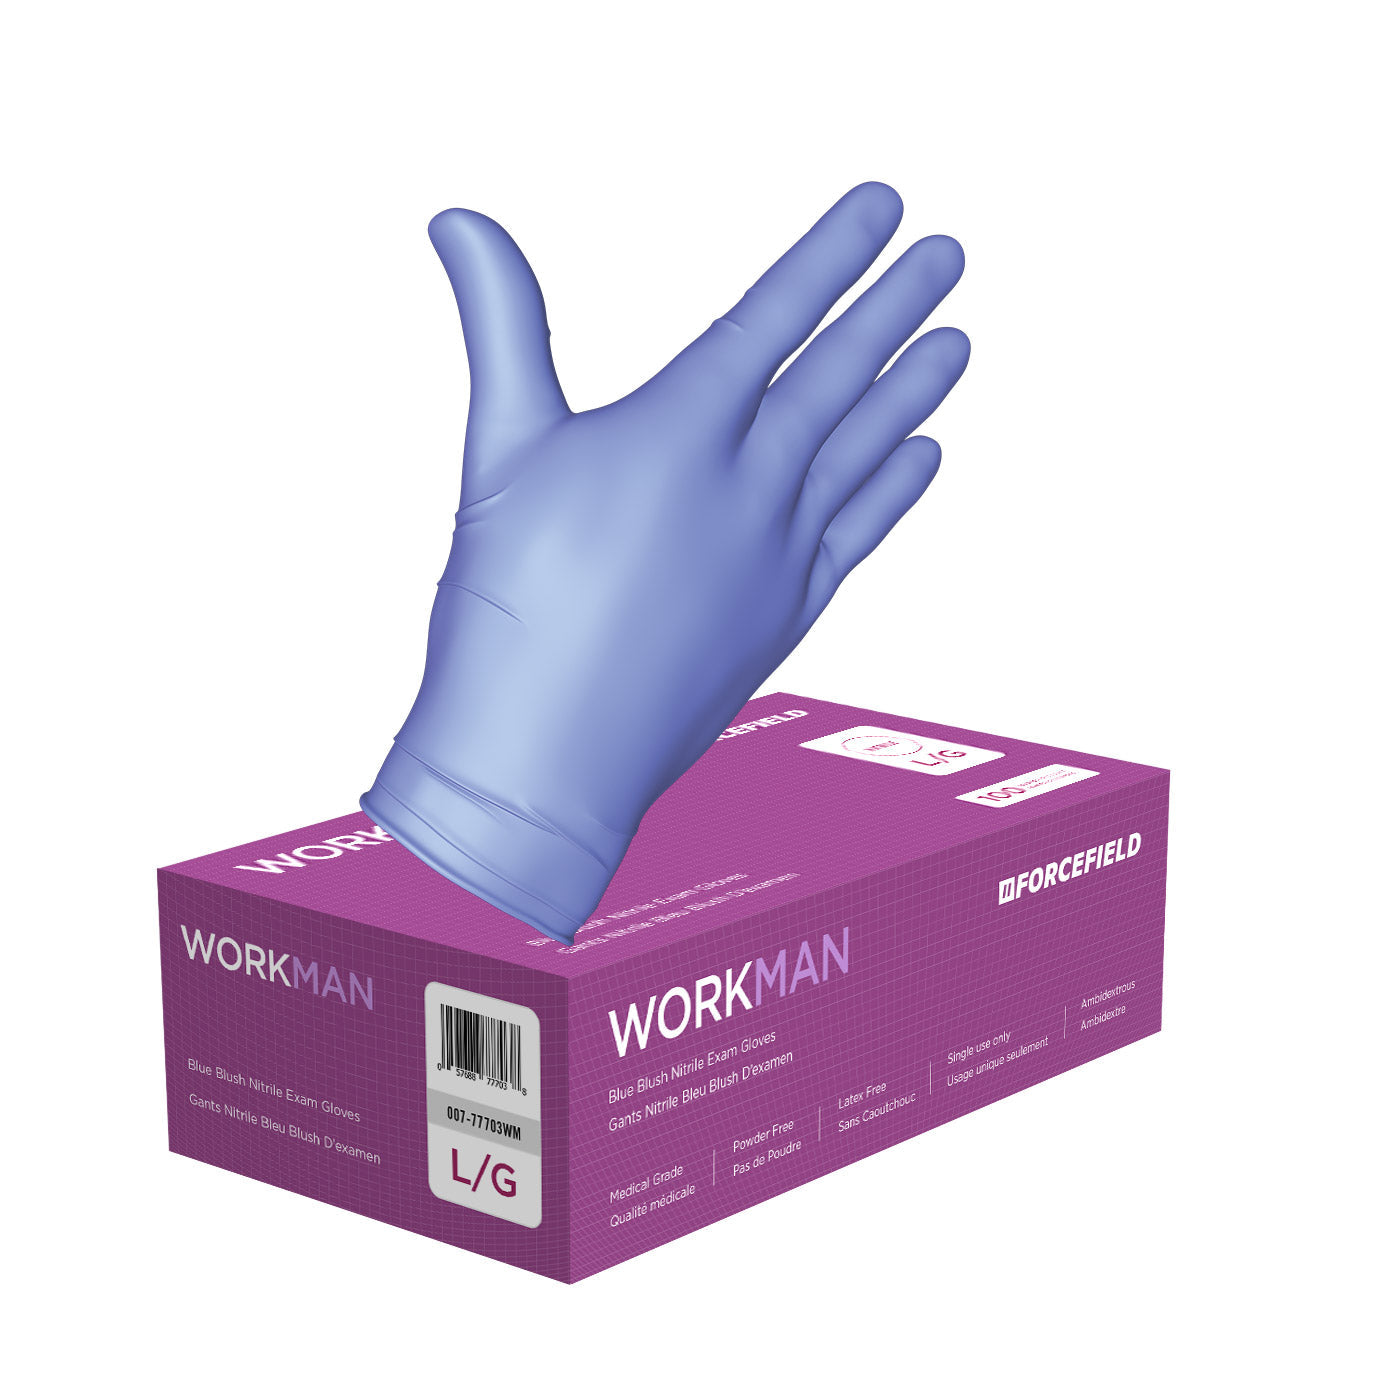 Are Nitrile Exam Gloves Latex Free?